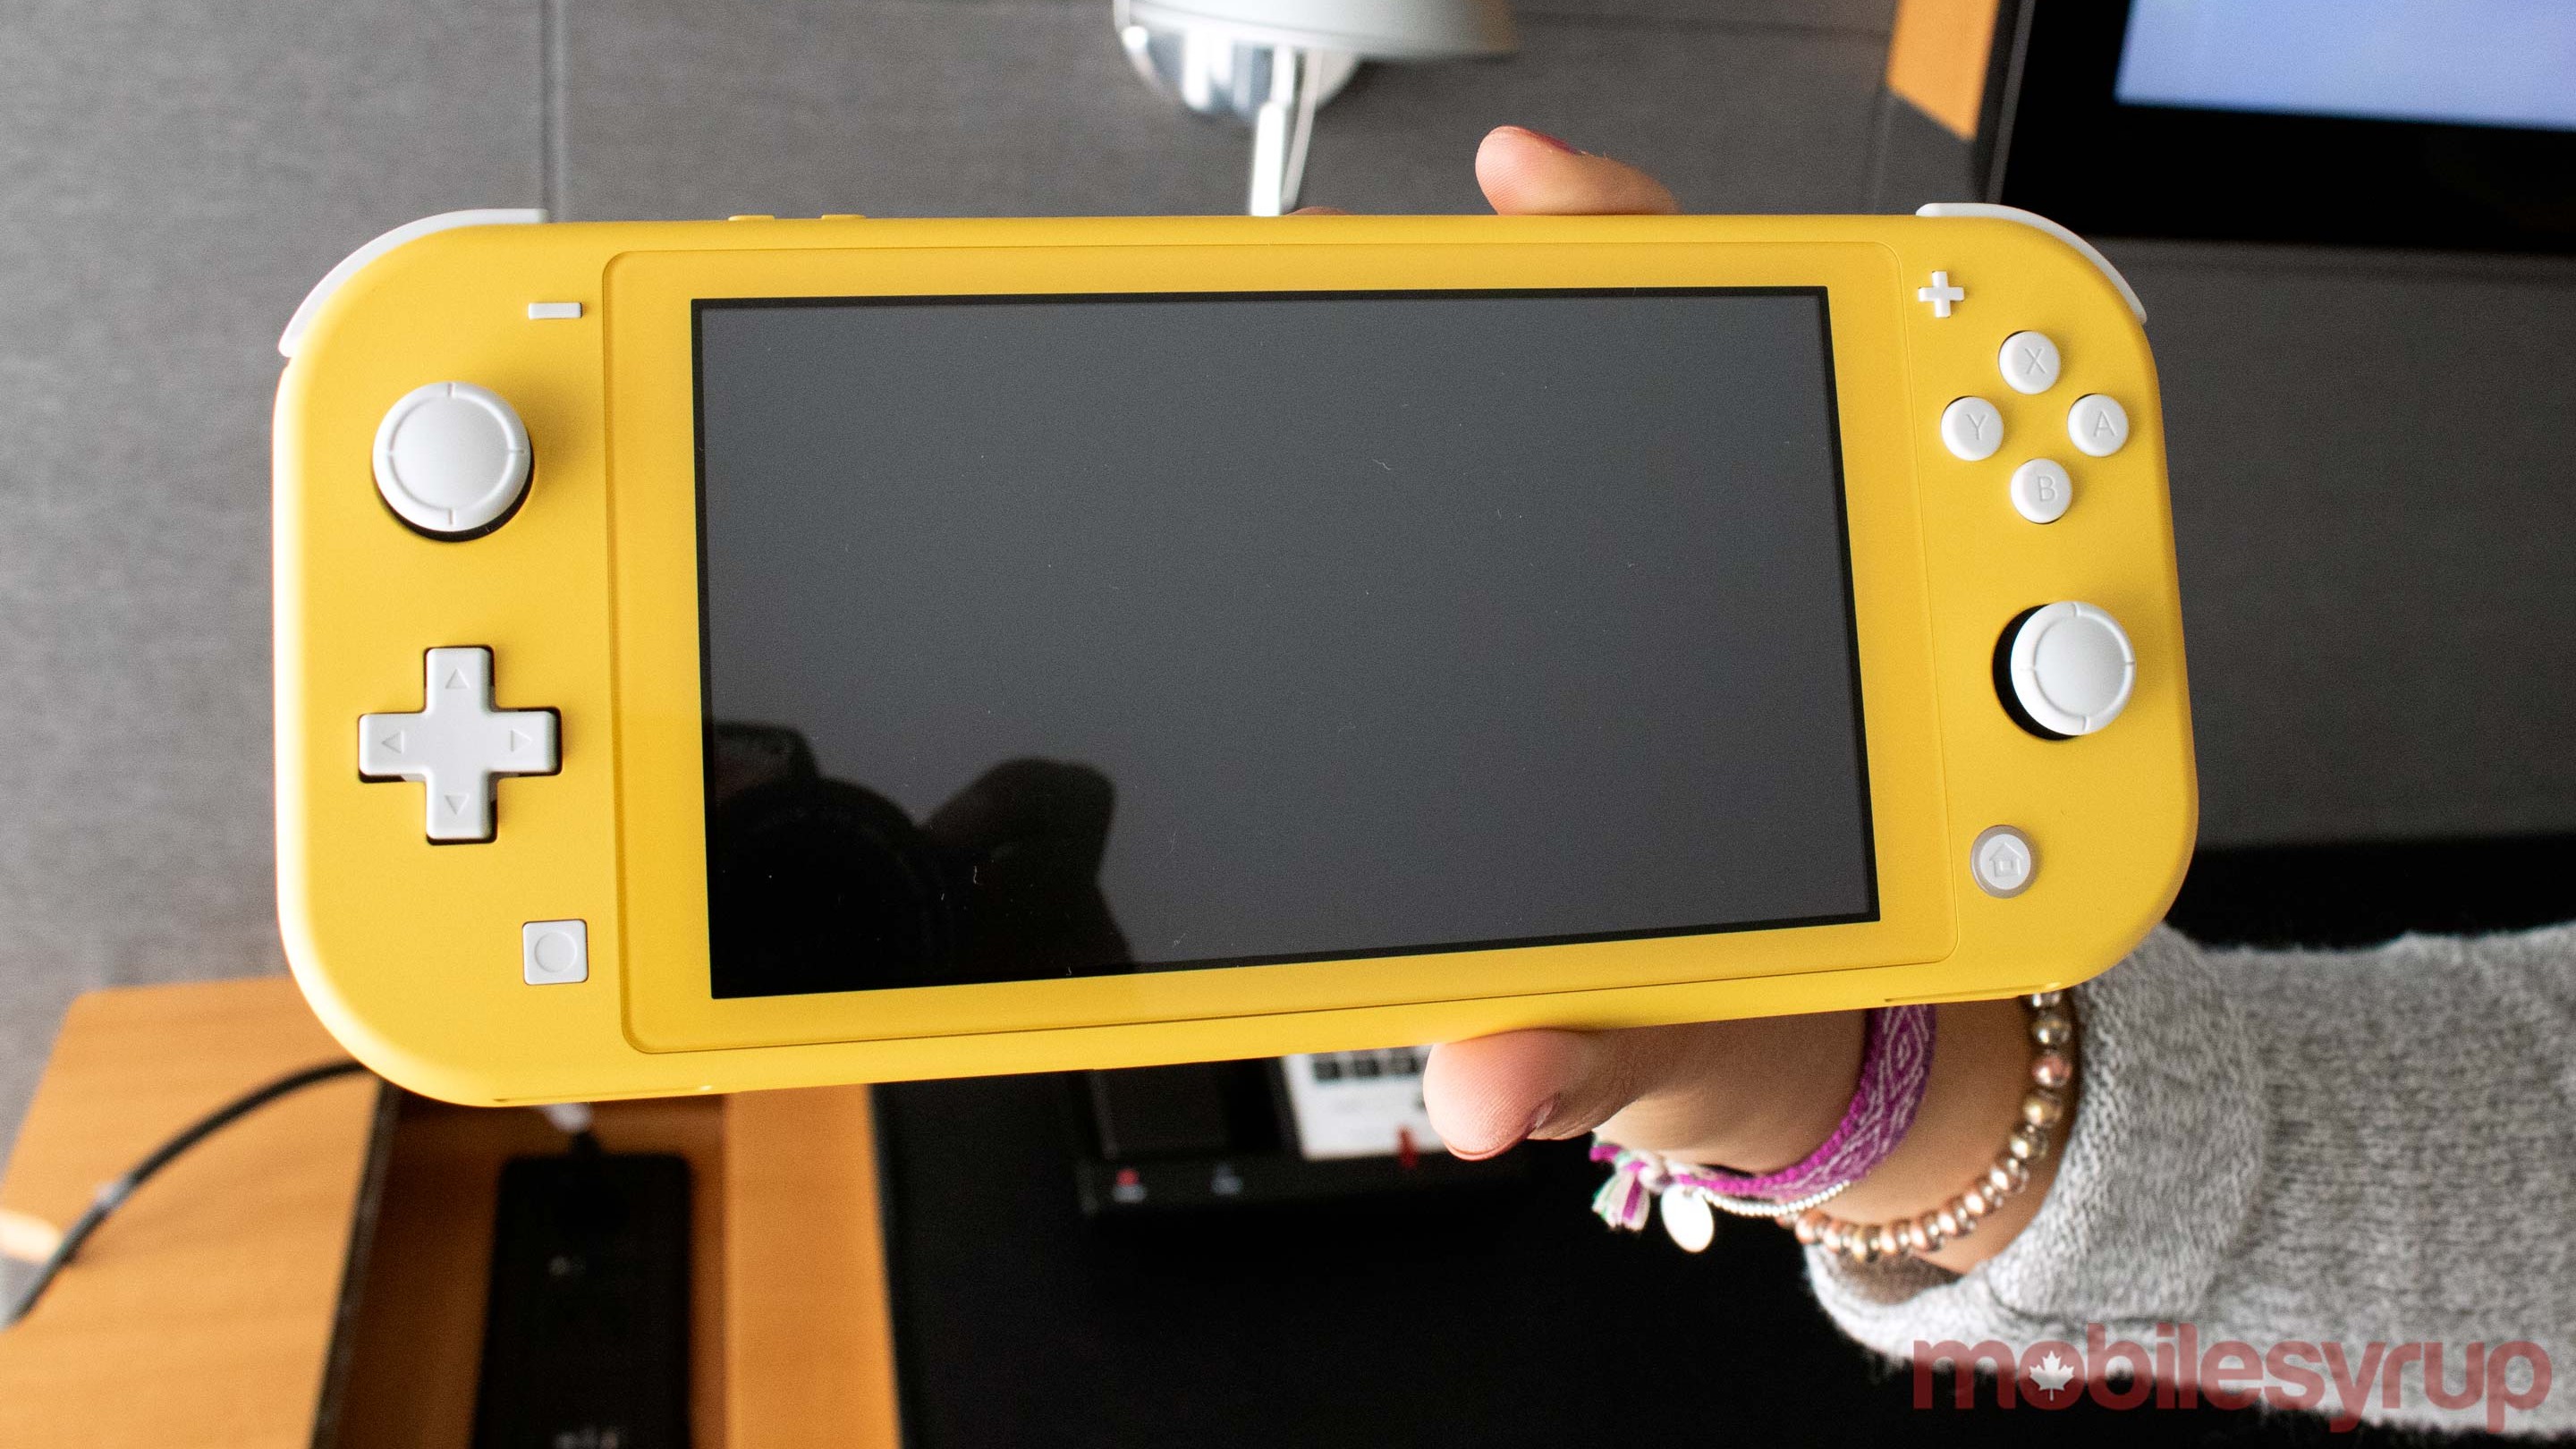 Nintendo Switch Lite Hands-on: An excellent handheld console that feels  great